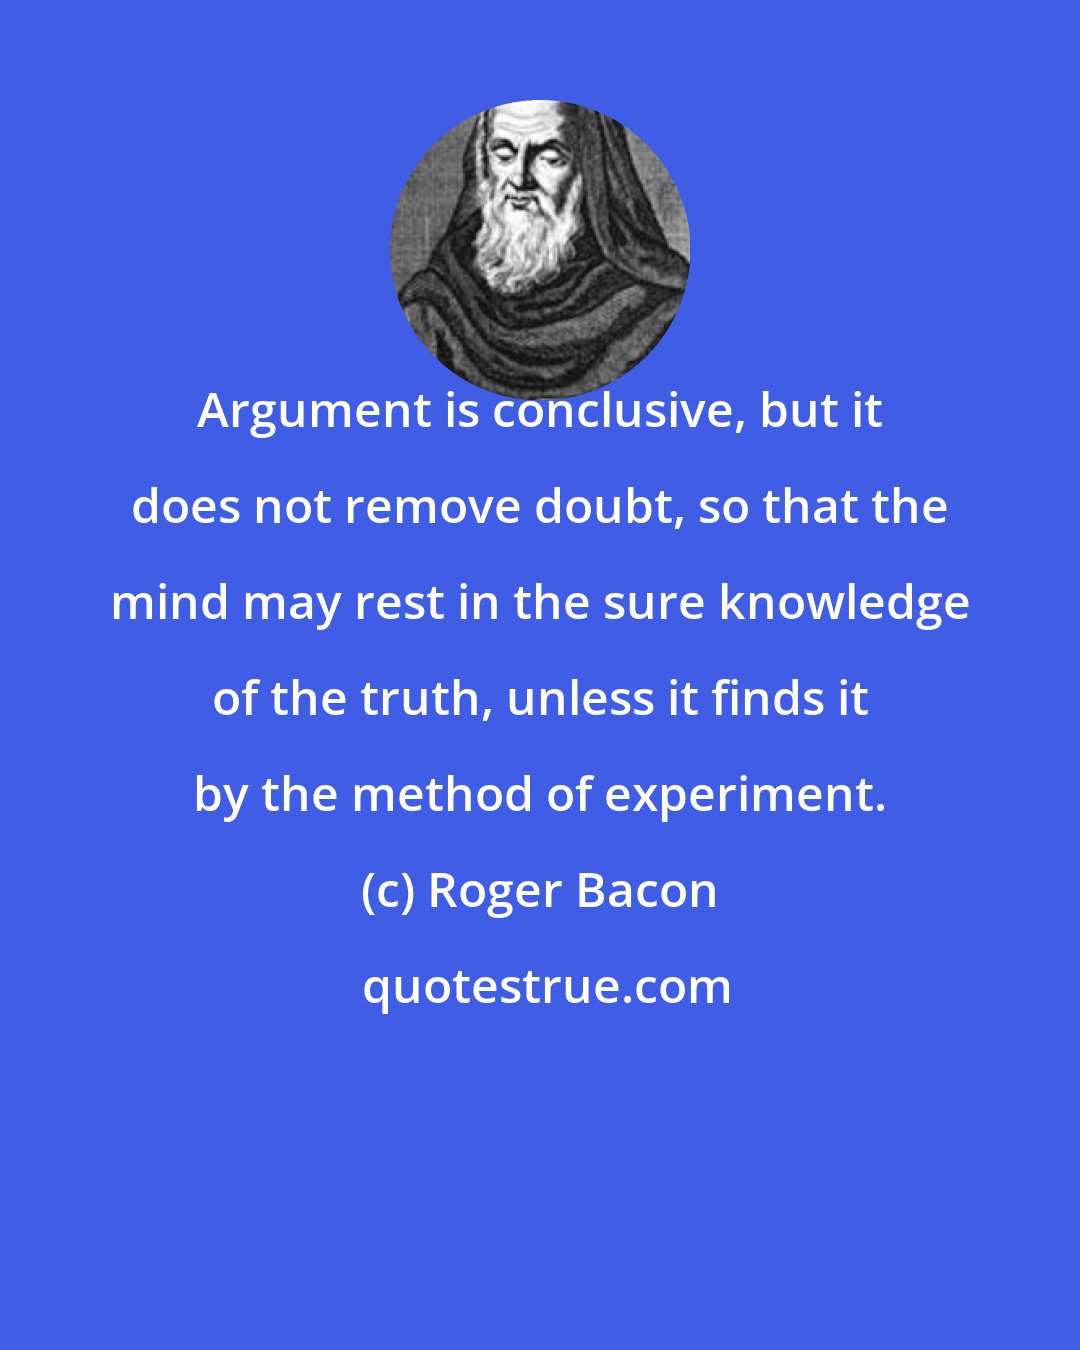 Roger Bacon: Argument is conclusive, but it does not remove doubt, so that the mind may rest in the sure knowledge of the truth, unless it finds it by the method of experiment.